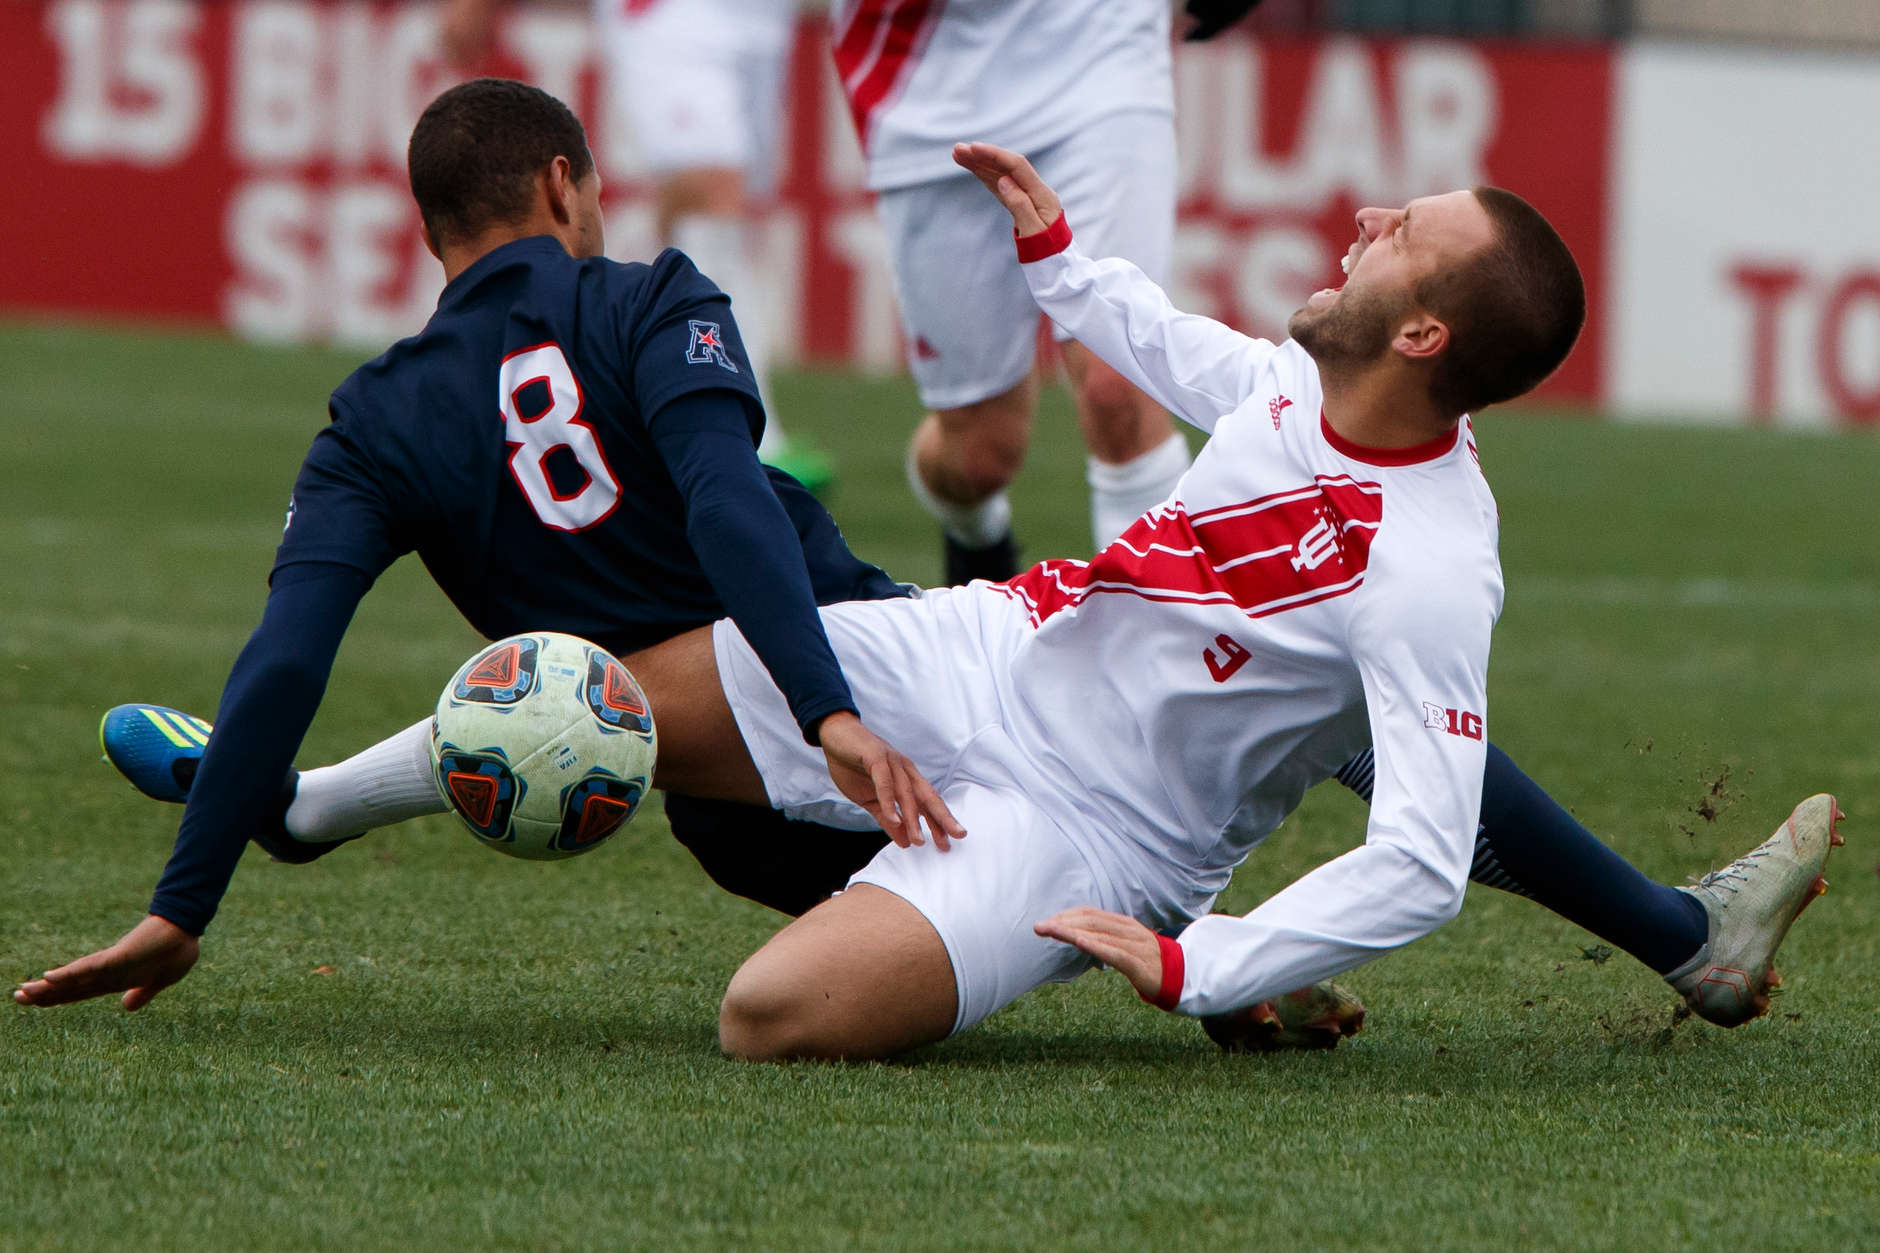 Connecticut's Felix Metzler (8) fouls Indiana's Thomas Warr (9) during the second half of an NCAA men's soccer tournament match at Bill Armstrong Stadium in Bloomington, Ind. on Sunday, Nov. 18, 2018. IU won 4-0. (James Brosher for The Herald-Times)